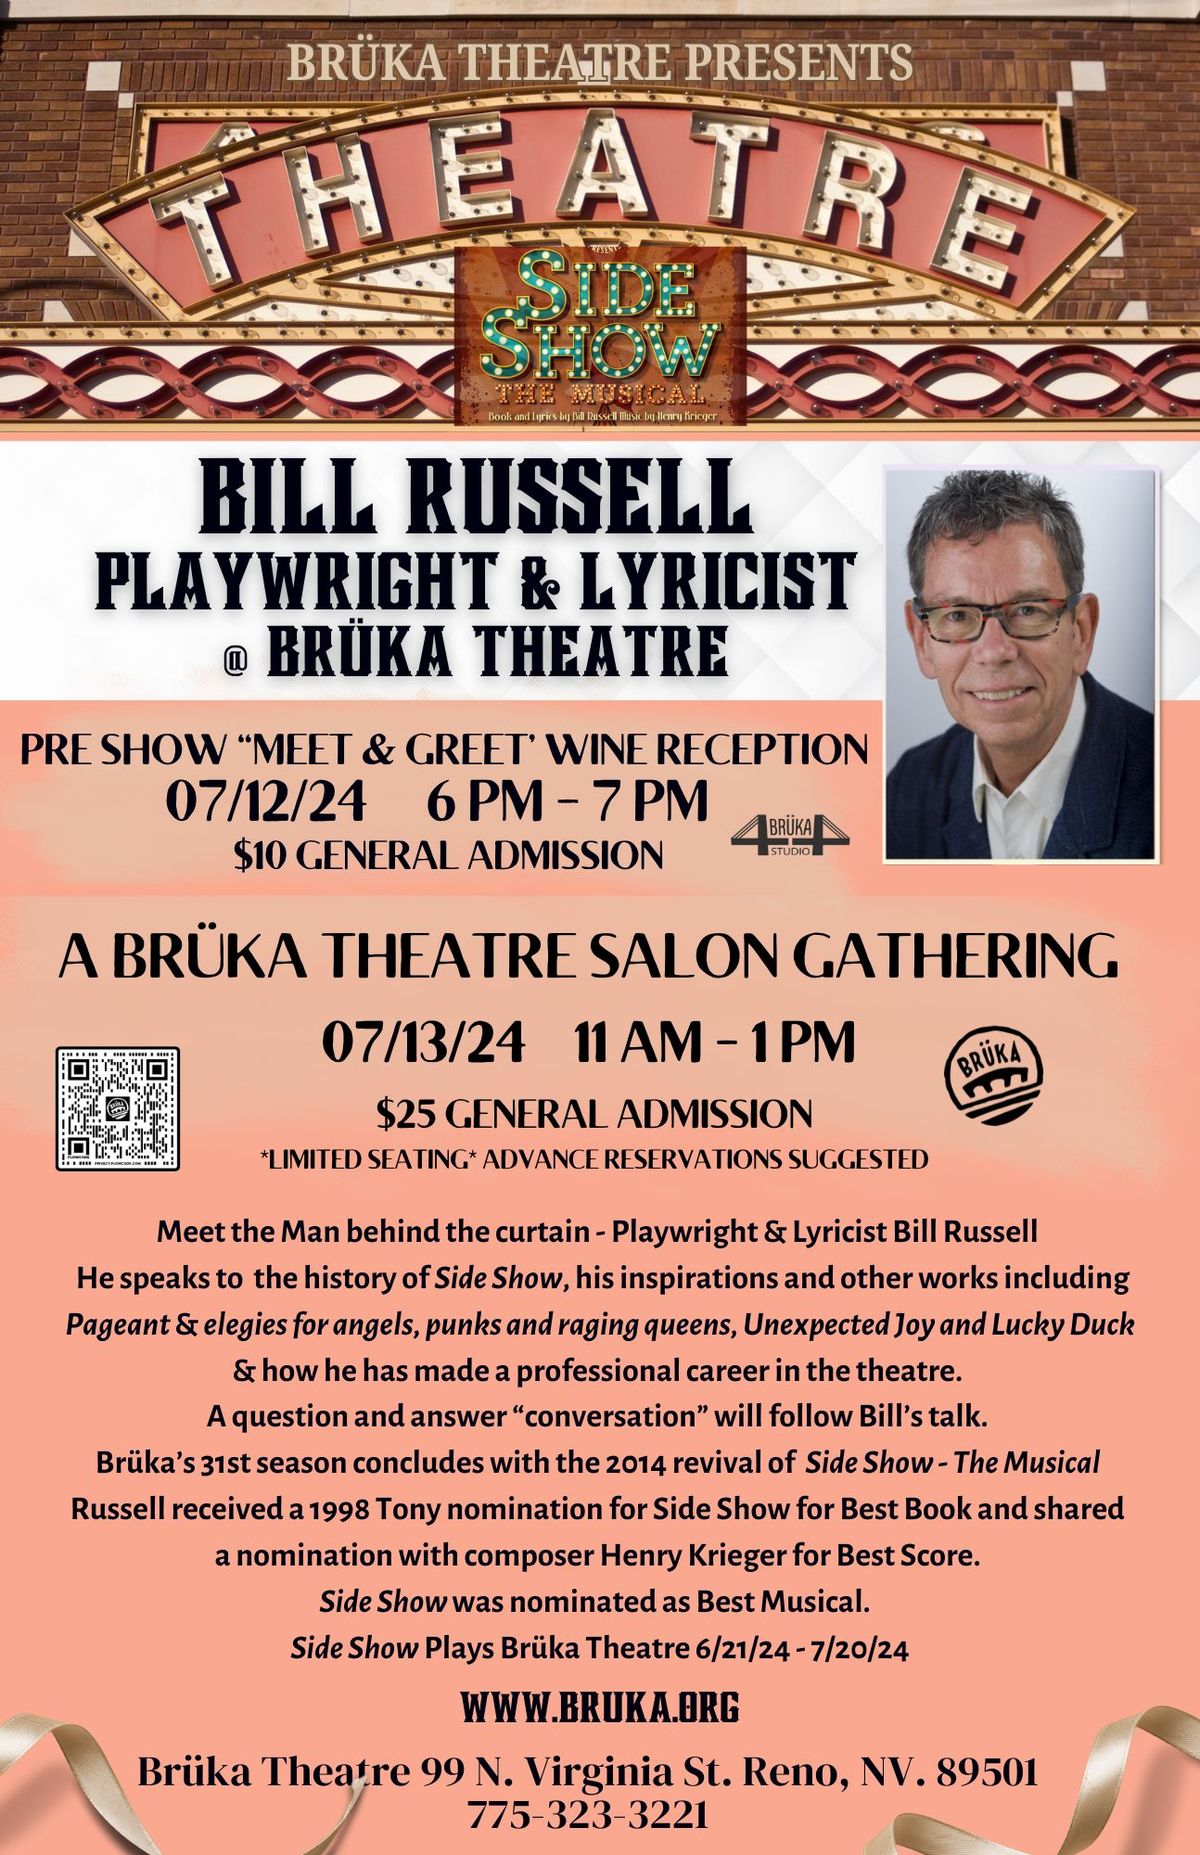 Pre-Show Wine Meet & Greet With Bill Russell - The Playwright & Lyricist of Side Show